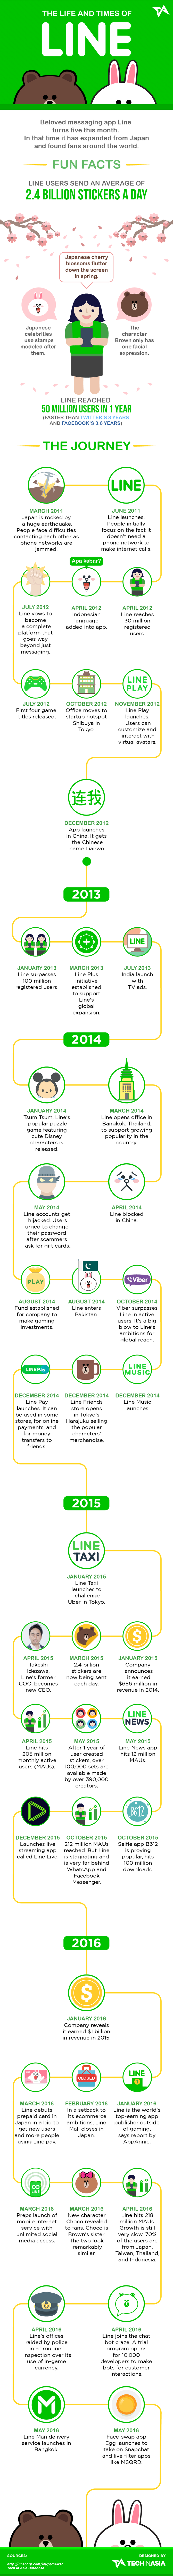 line-journey-and-timeline-infographic